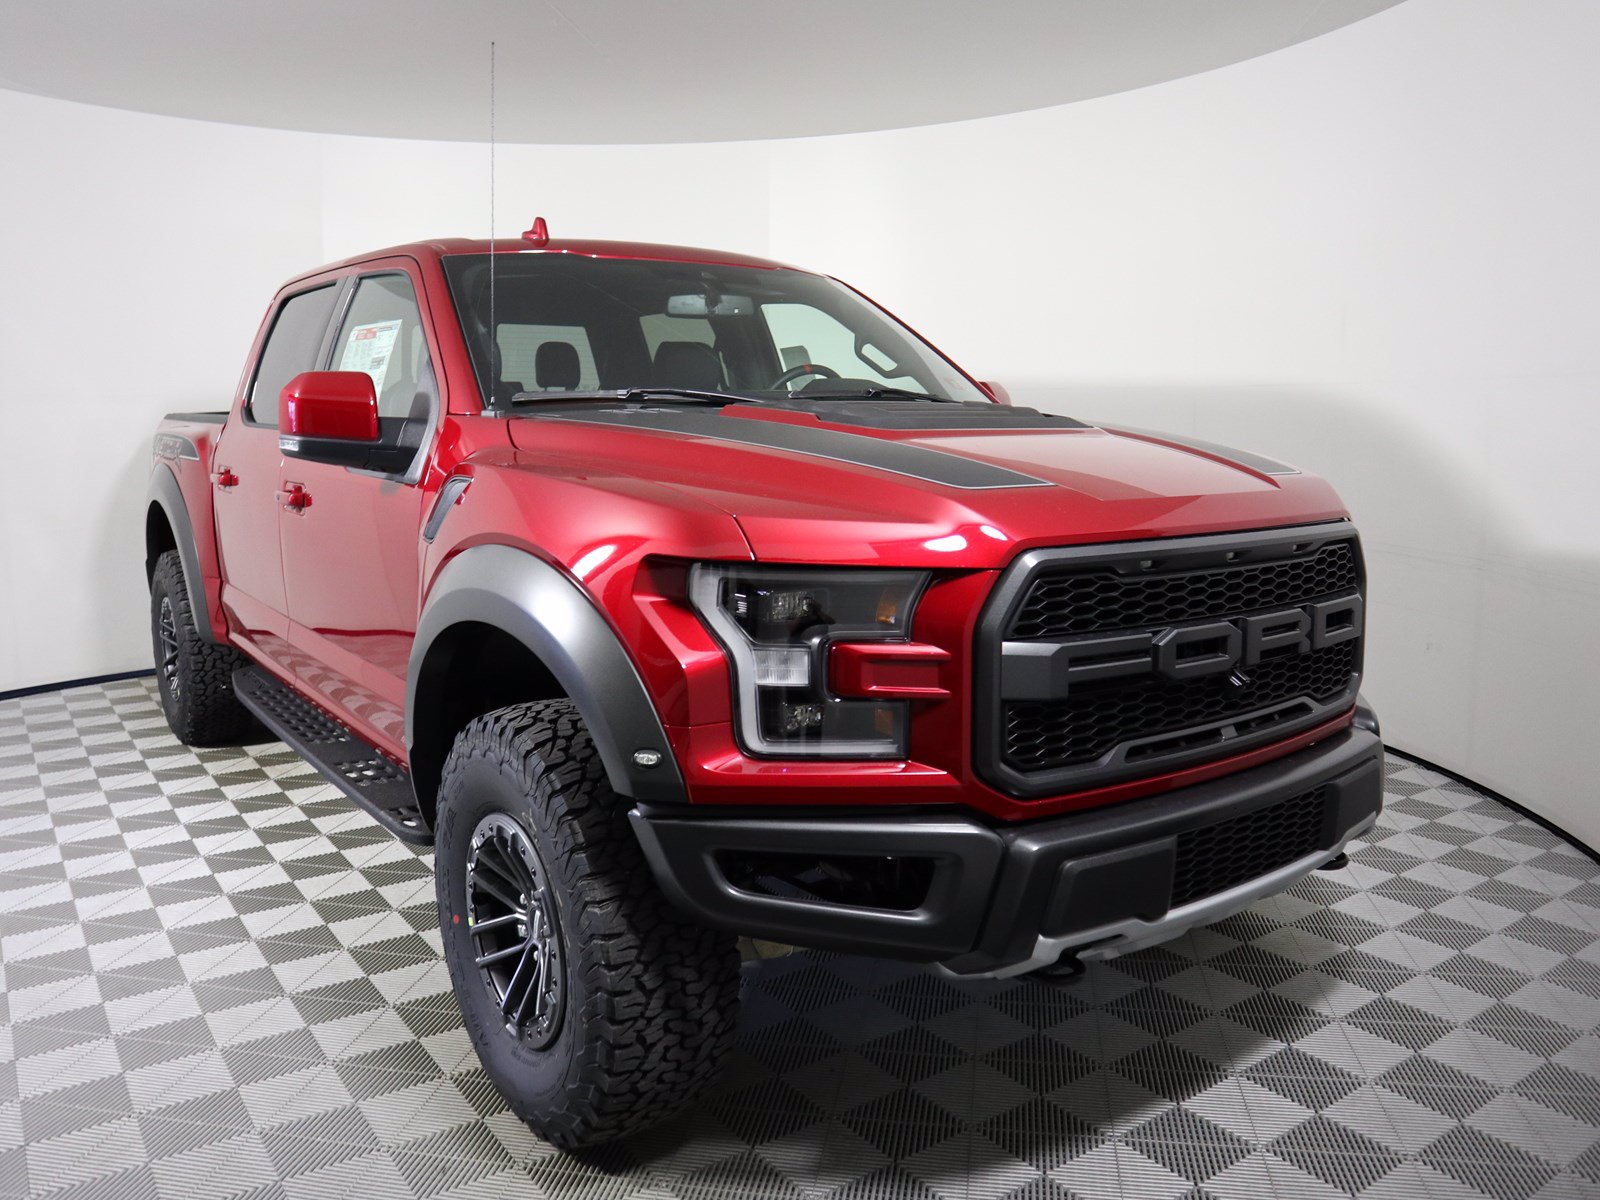 New 2020 Ford F-150 Raptor Crew Cab Pickup in Parkersburg #F19901